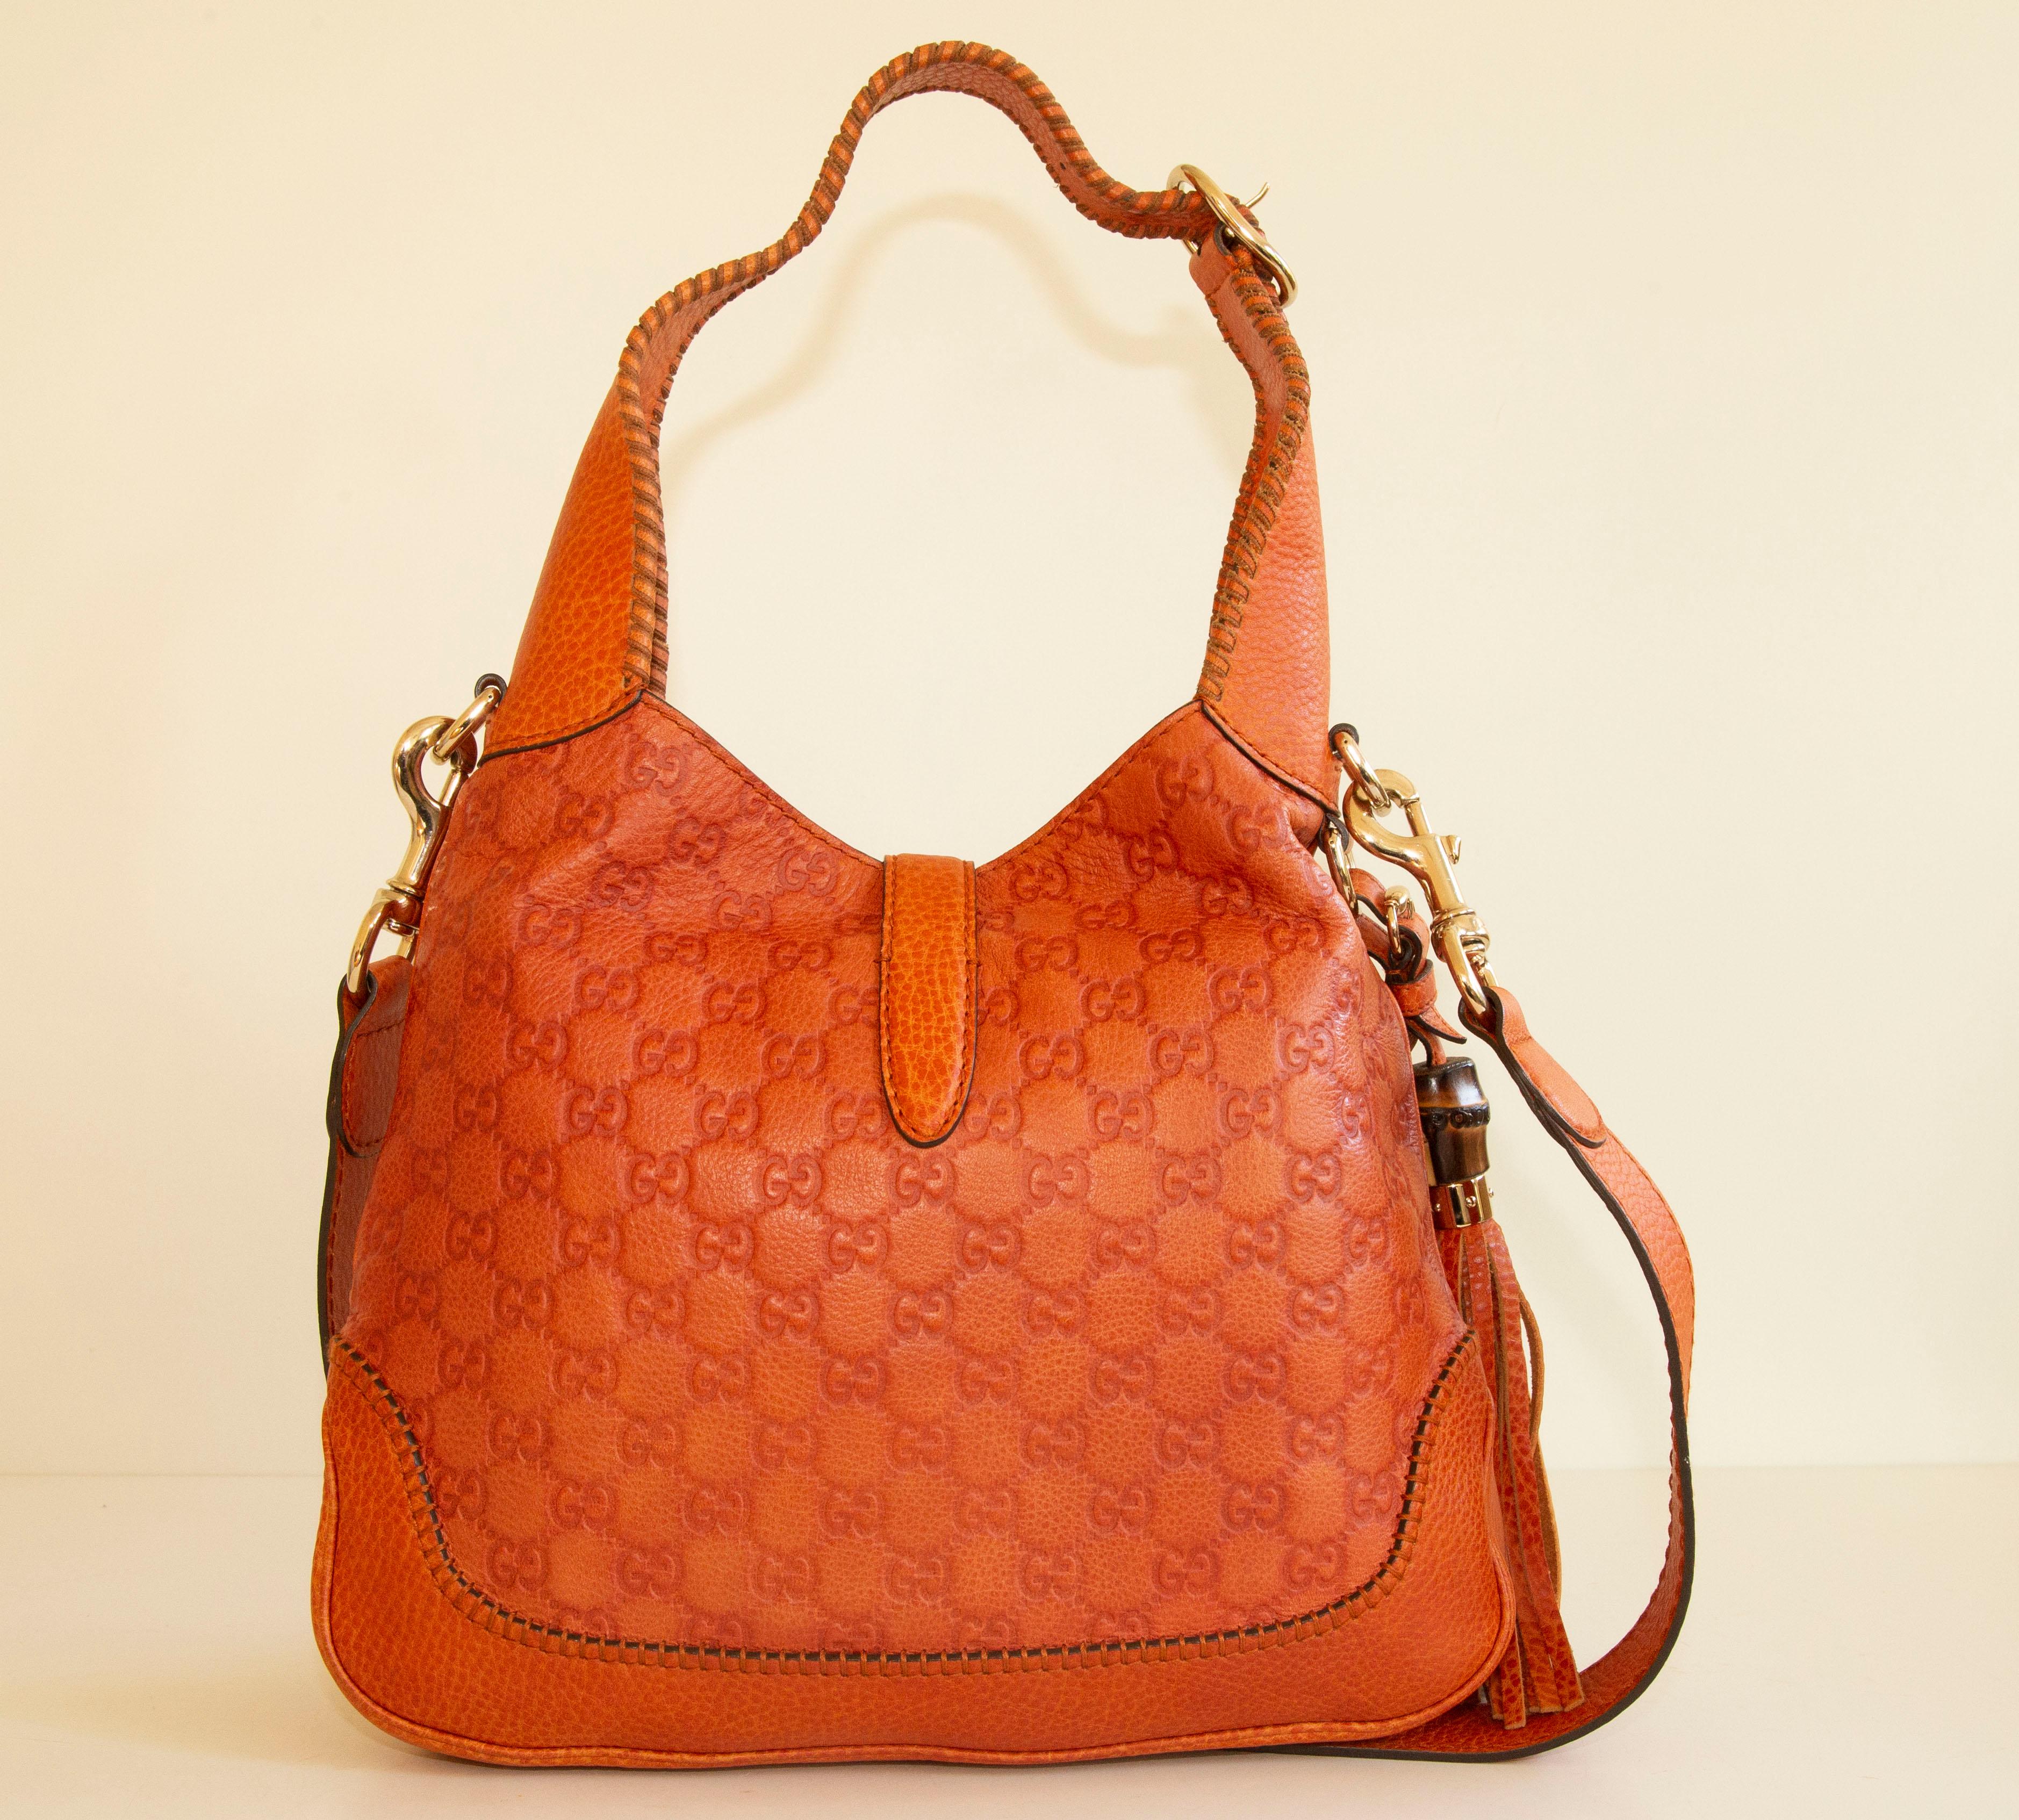 Gucci New Jackie Medium shoulder bag in made of  orange GG embossed leather. The bag features gold toned hardware. The interior is lined with light beige fabric, and next to the major compartment it features two side pockets of which one has a